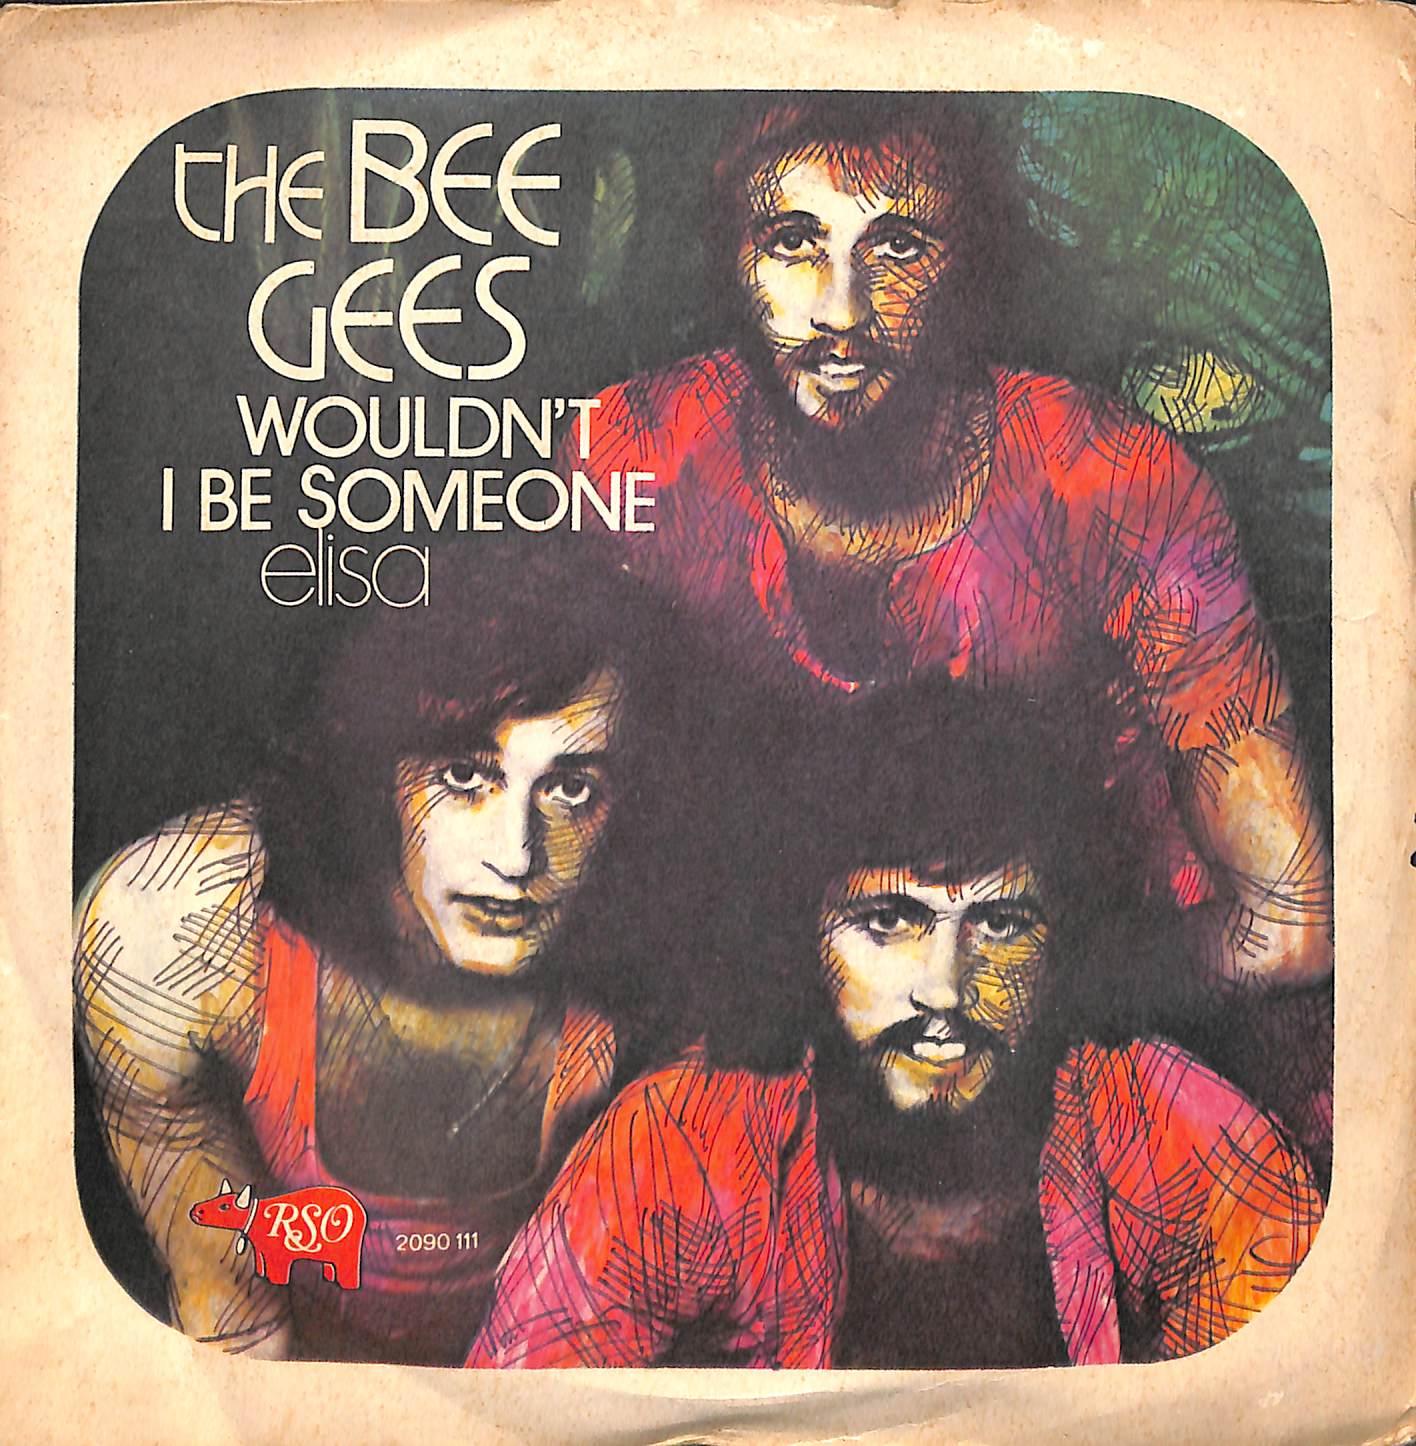 72150 45 giri 7 \' - The Bee Gees - Wouldn\'t I Be Someone / Elisa